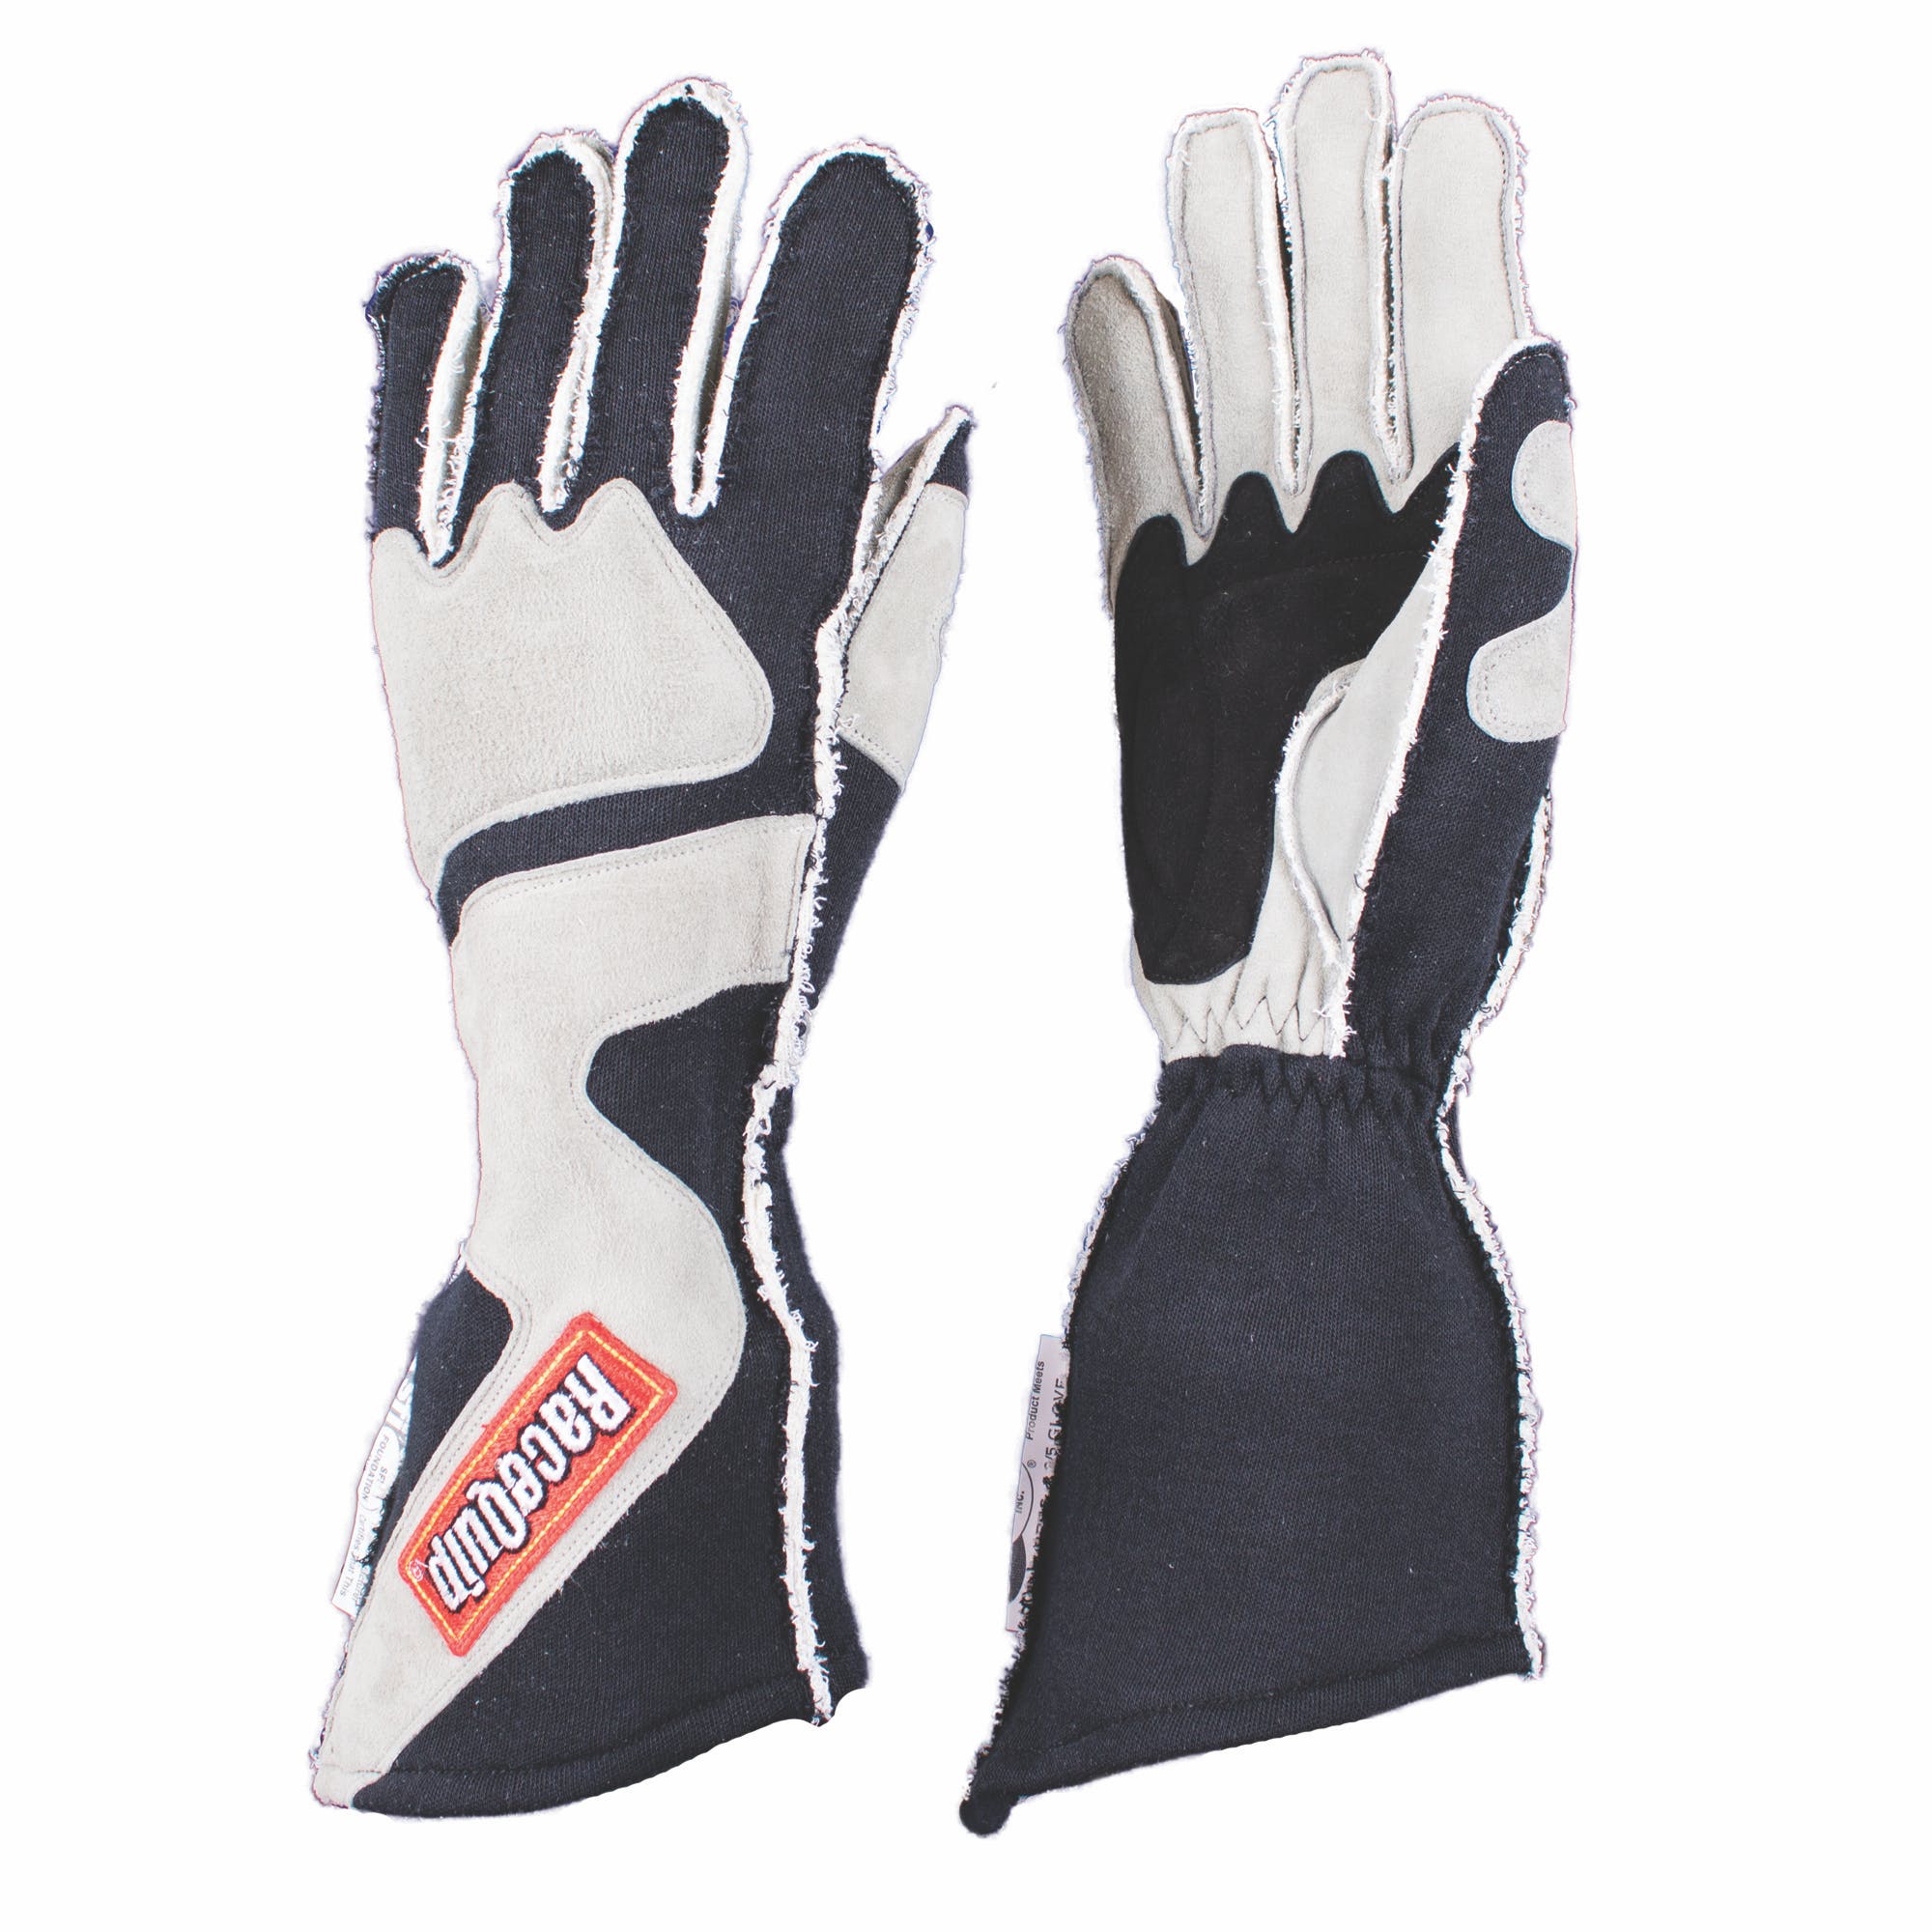 RaceQuip 359607 SFI-5 Out Seam Angle-Cut Gauntlet Racing Gloves (Gray/Black, XX-Large)